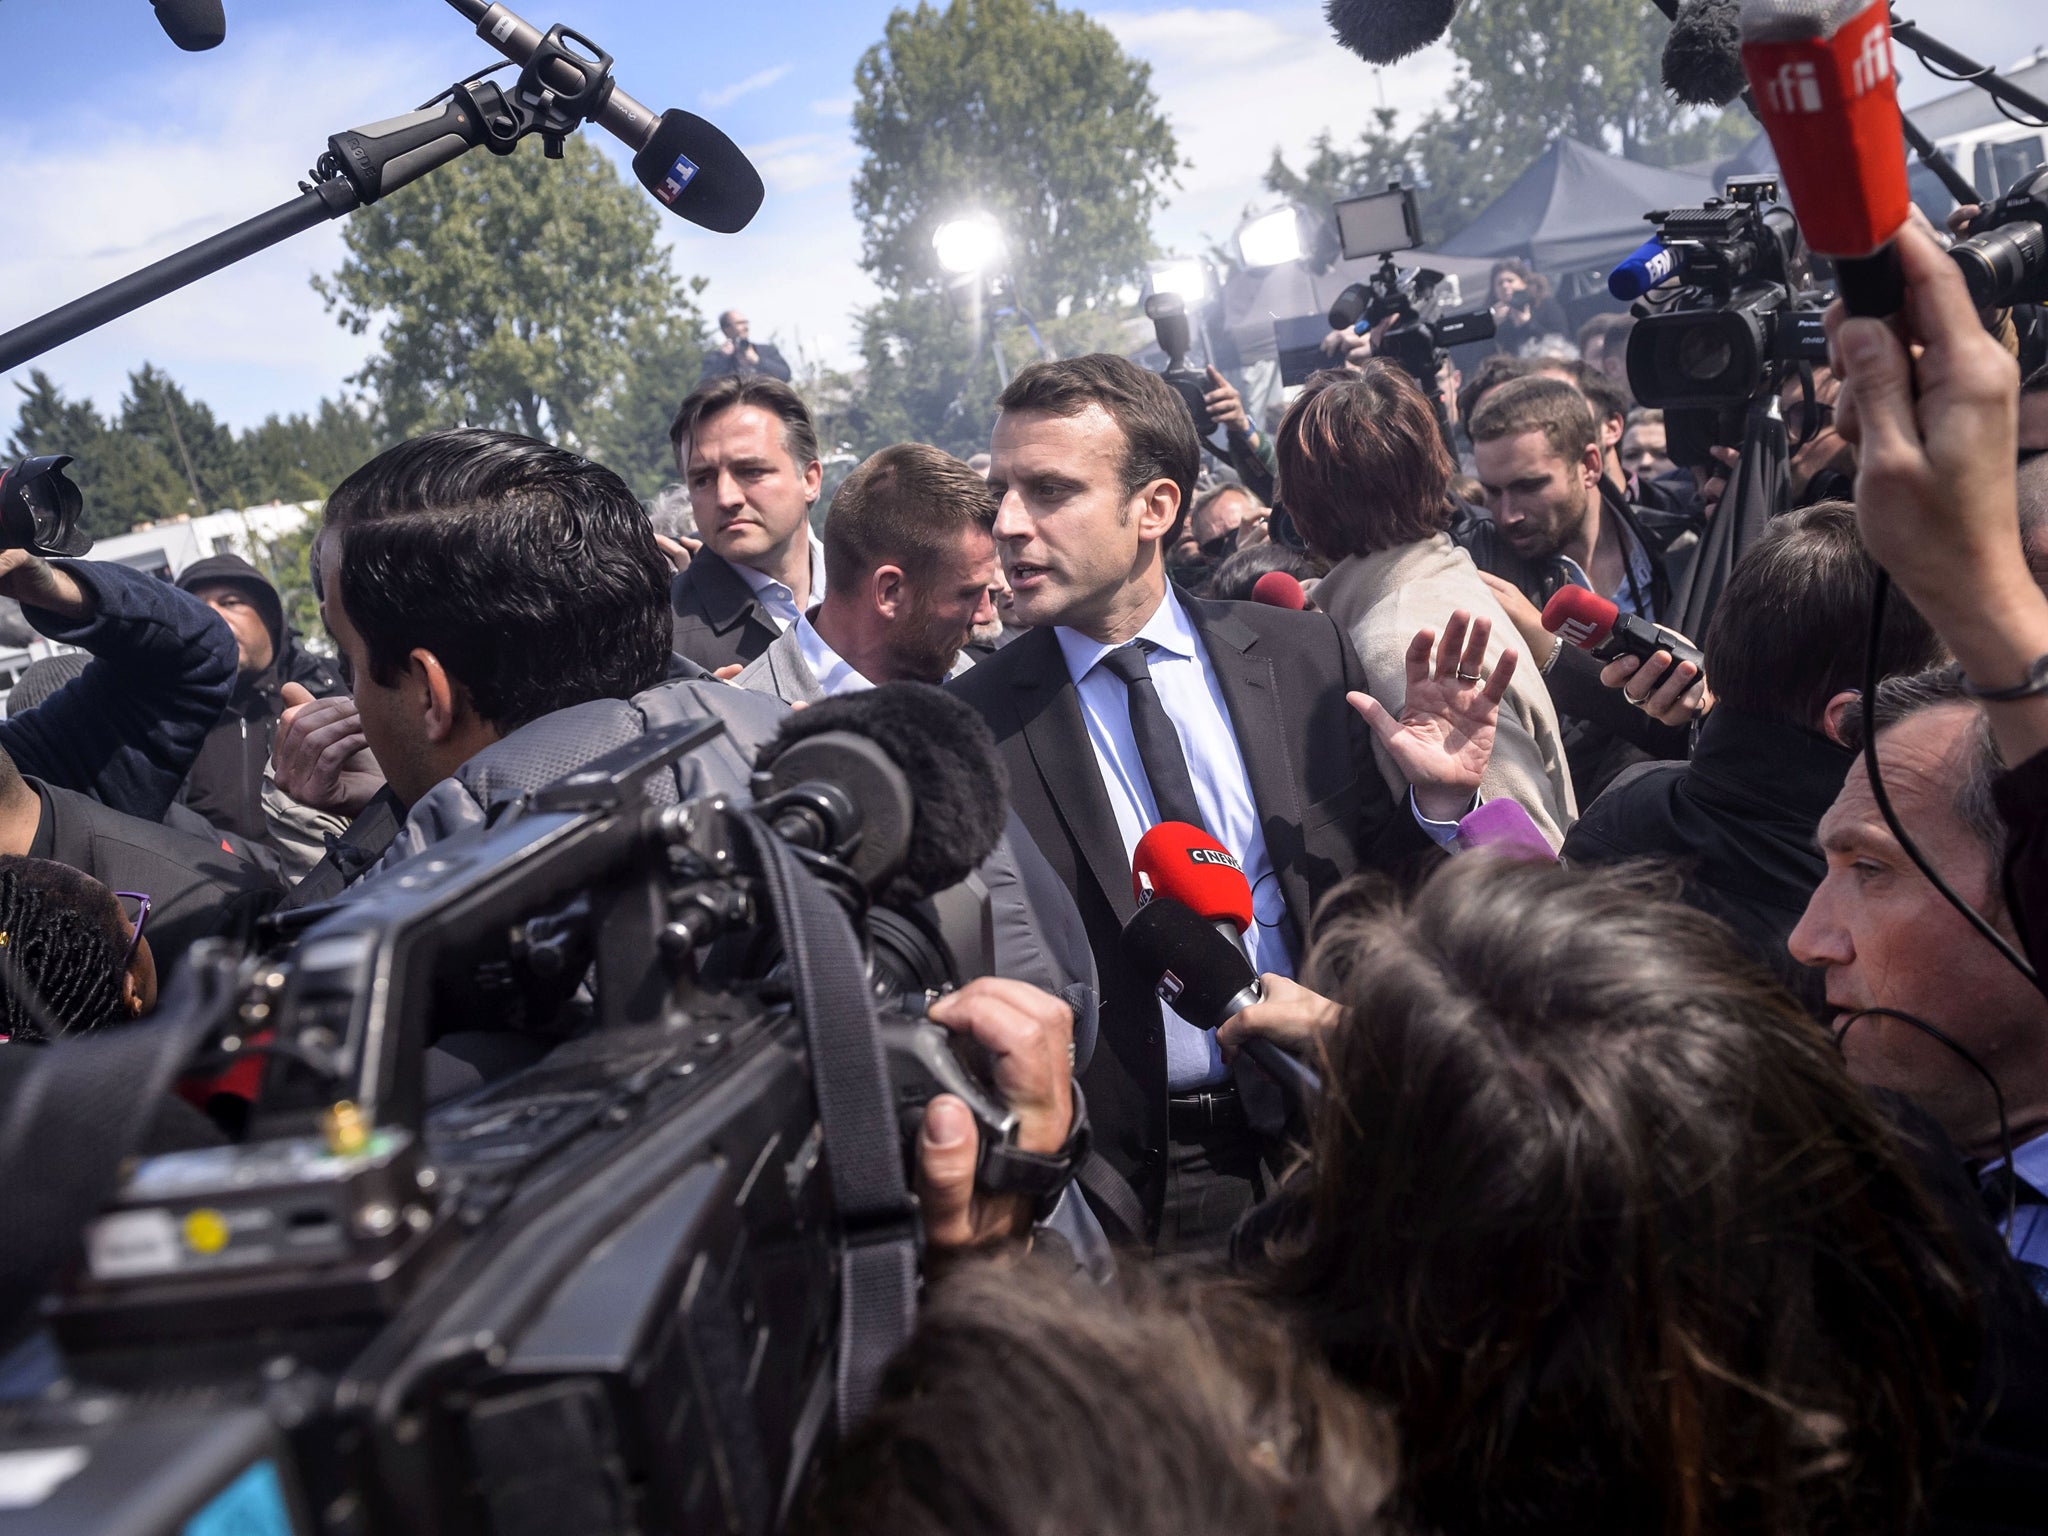 French presidential election candidate Emmanuel Macron has found a way to tap into the populist wave. Why can't British Remainers find their own alternative?